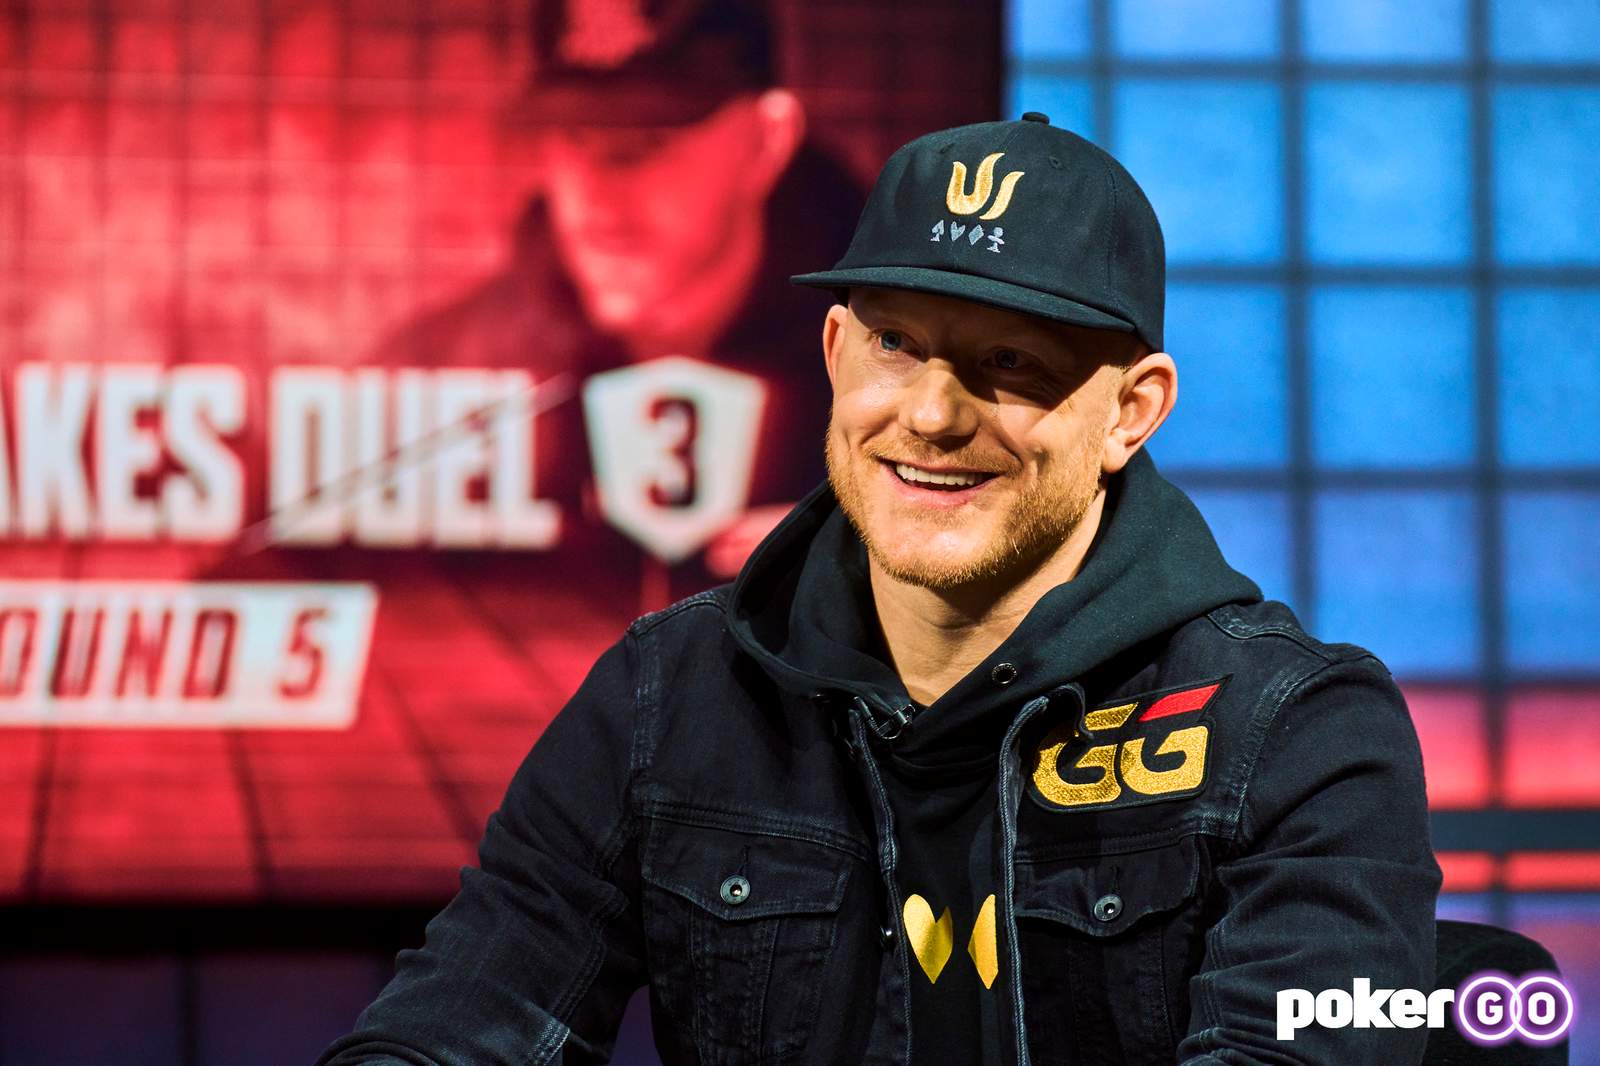 Jason Koon Beats Phil Hellmuth in $1,600,000 High Stakes Duel Match